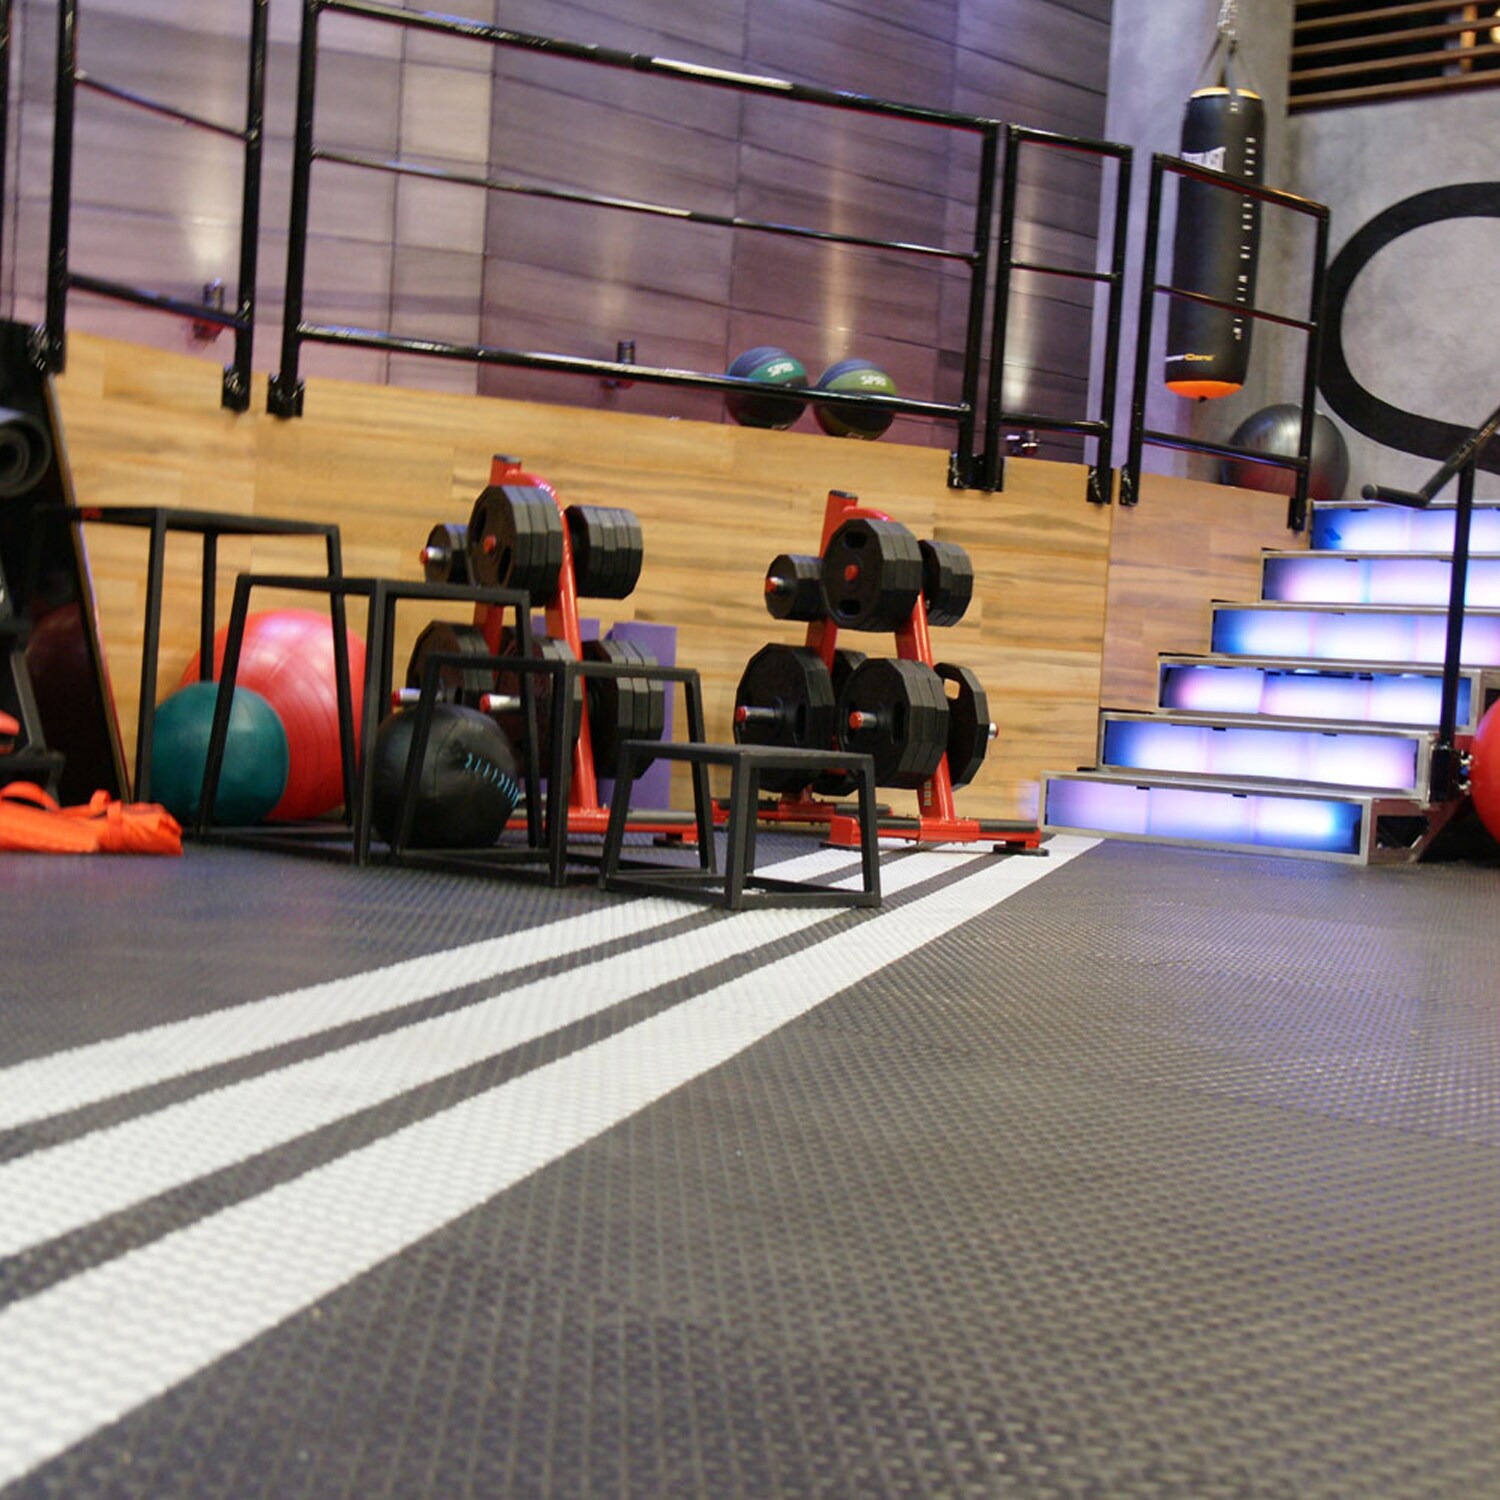 Rubber flooring for gym interiors